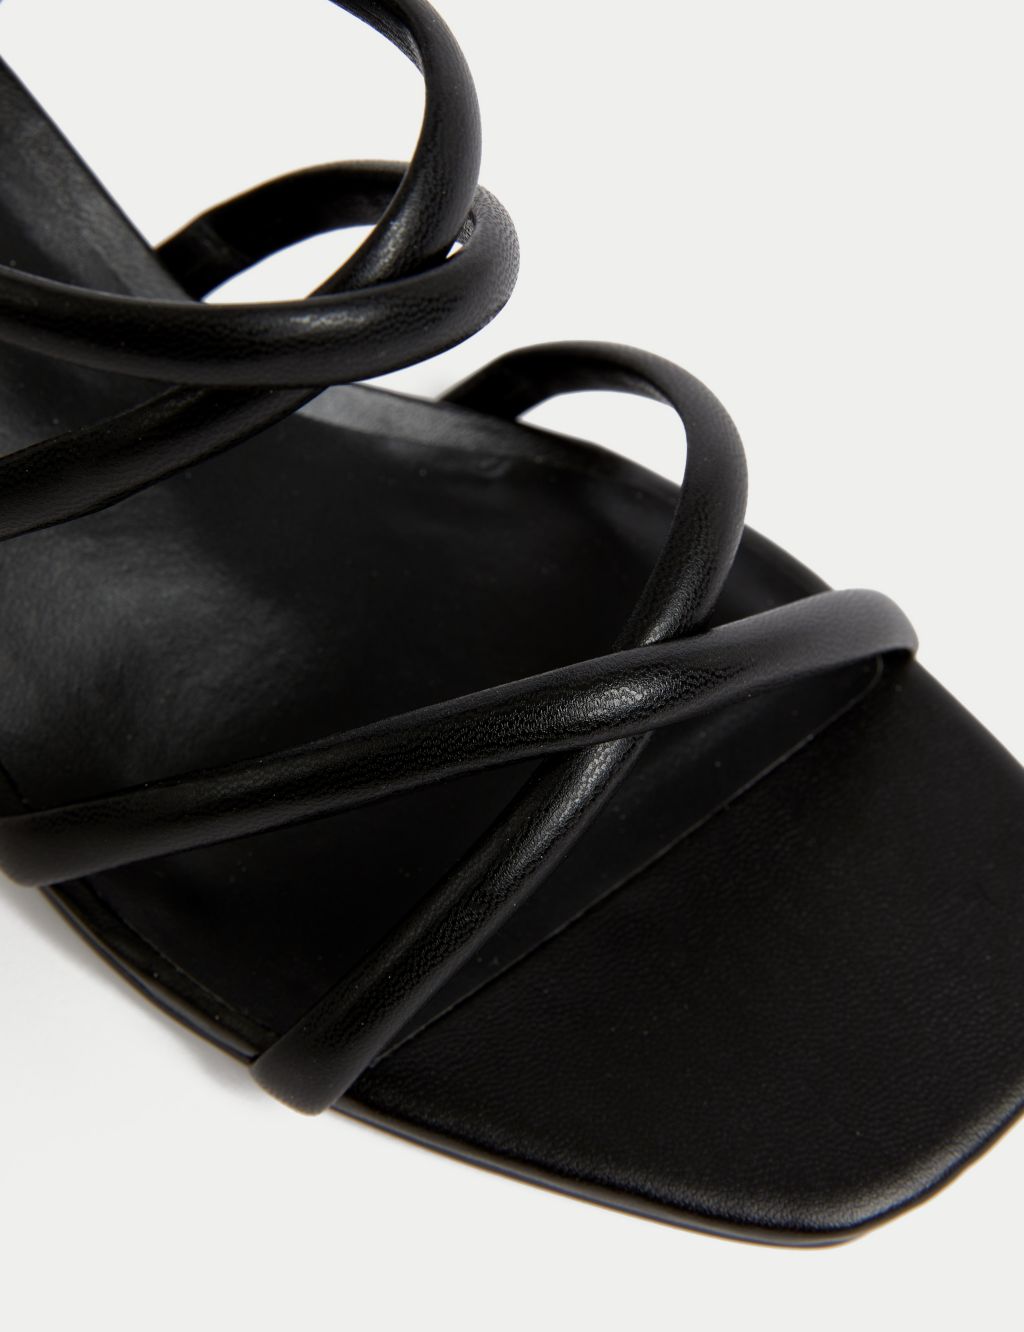 Wide Fit Strappy Block Heel Sandals image 3